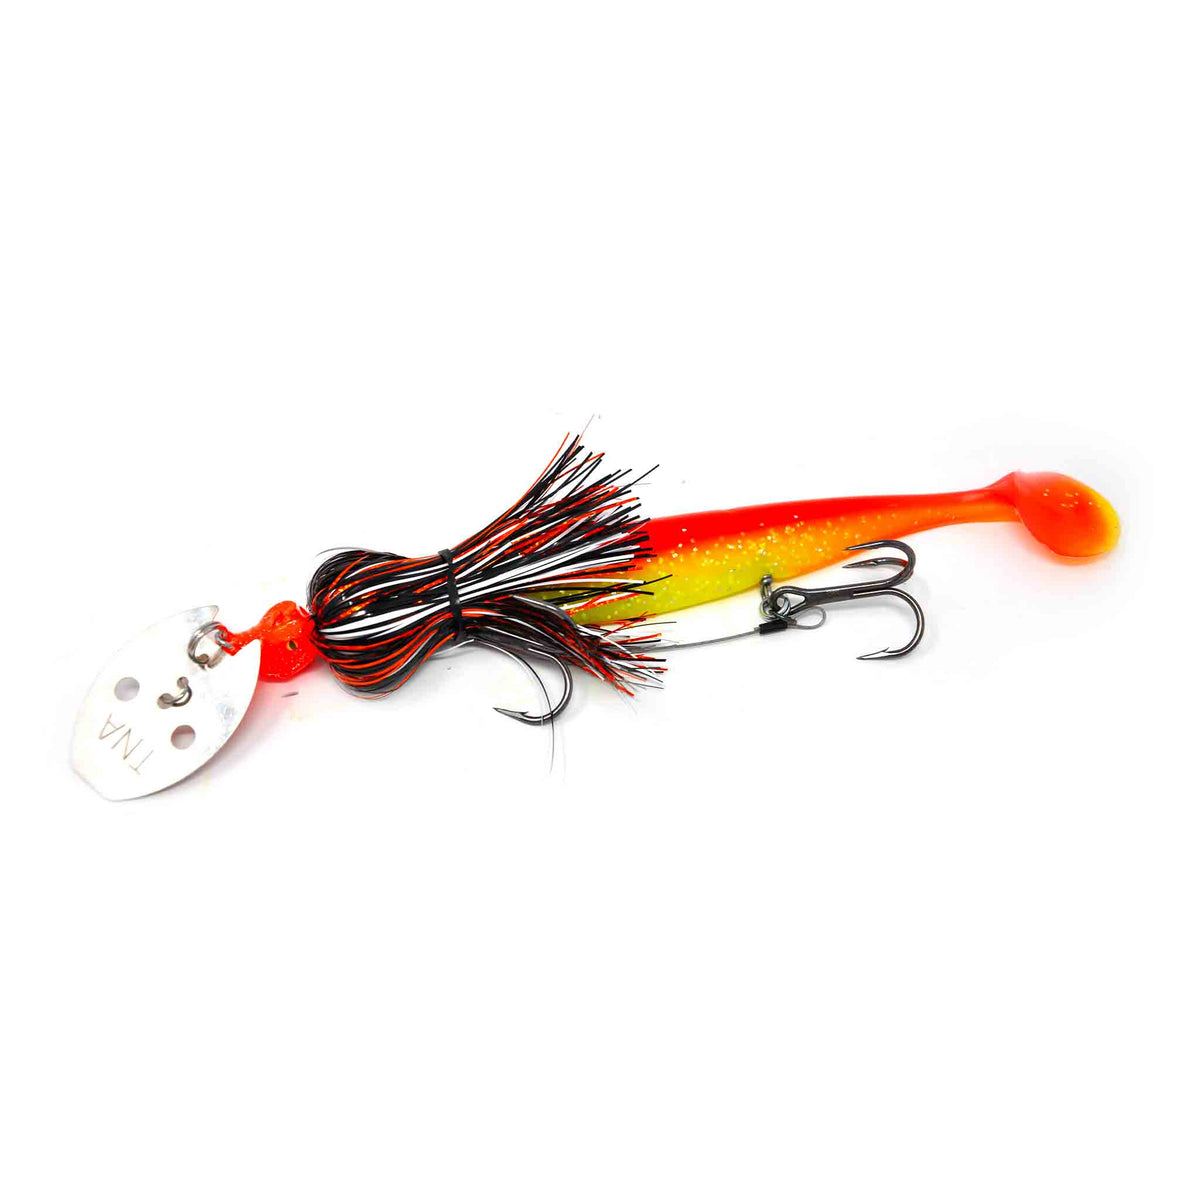 View of Chatterbaits TnA Tackle Waggin Dragon Chatterbait Ball Licker available at EZOKO Pike and Musky Shop